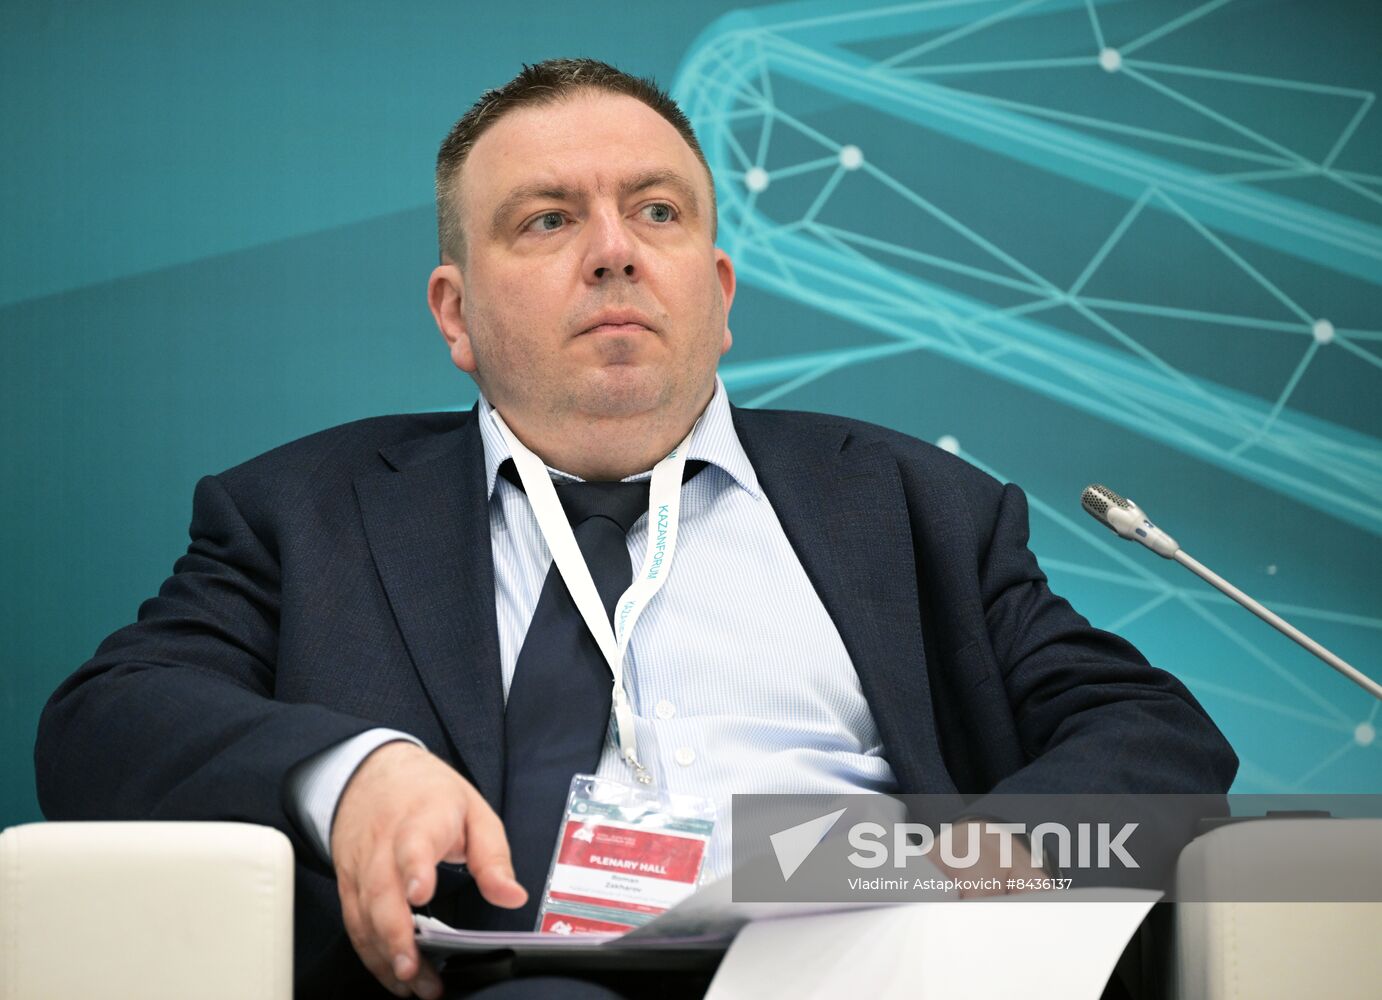 KAZANFORUM 2023. Prospects for the Russia-OIC Development Cooperation in the Field of Science, Scientific and Technological Development and Intellectual Property